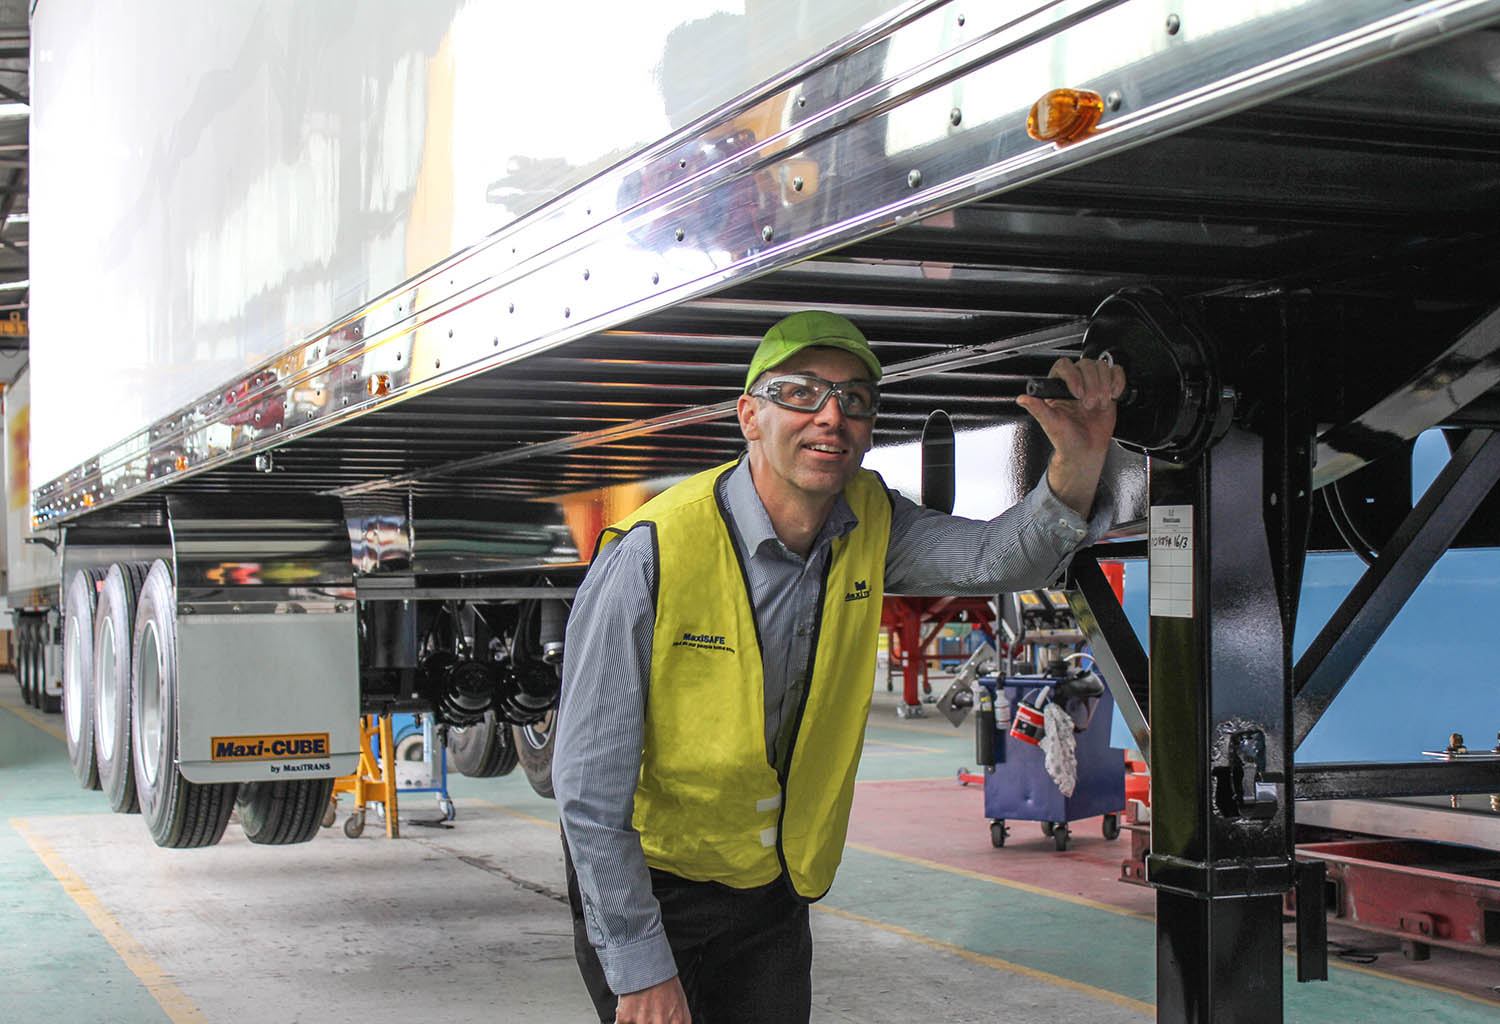 Daniel inspecting a Maxi-CUBE trailer on the production at MaxiTRANS manufacturing facility in Ballarat, Victoria.